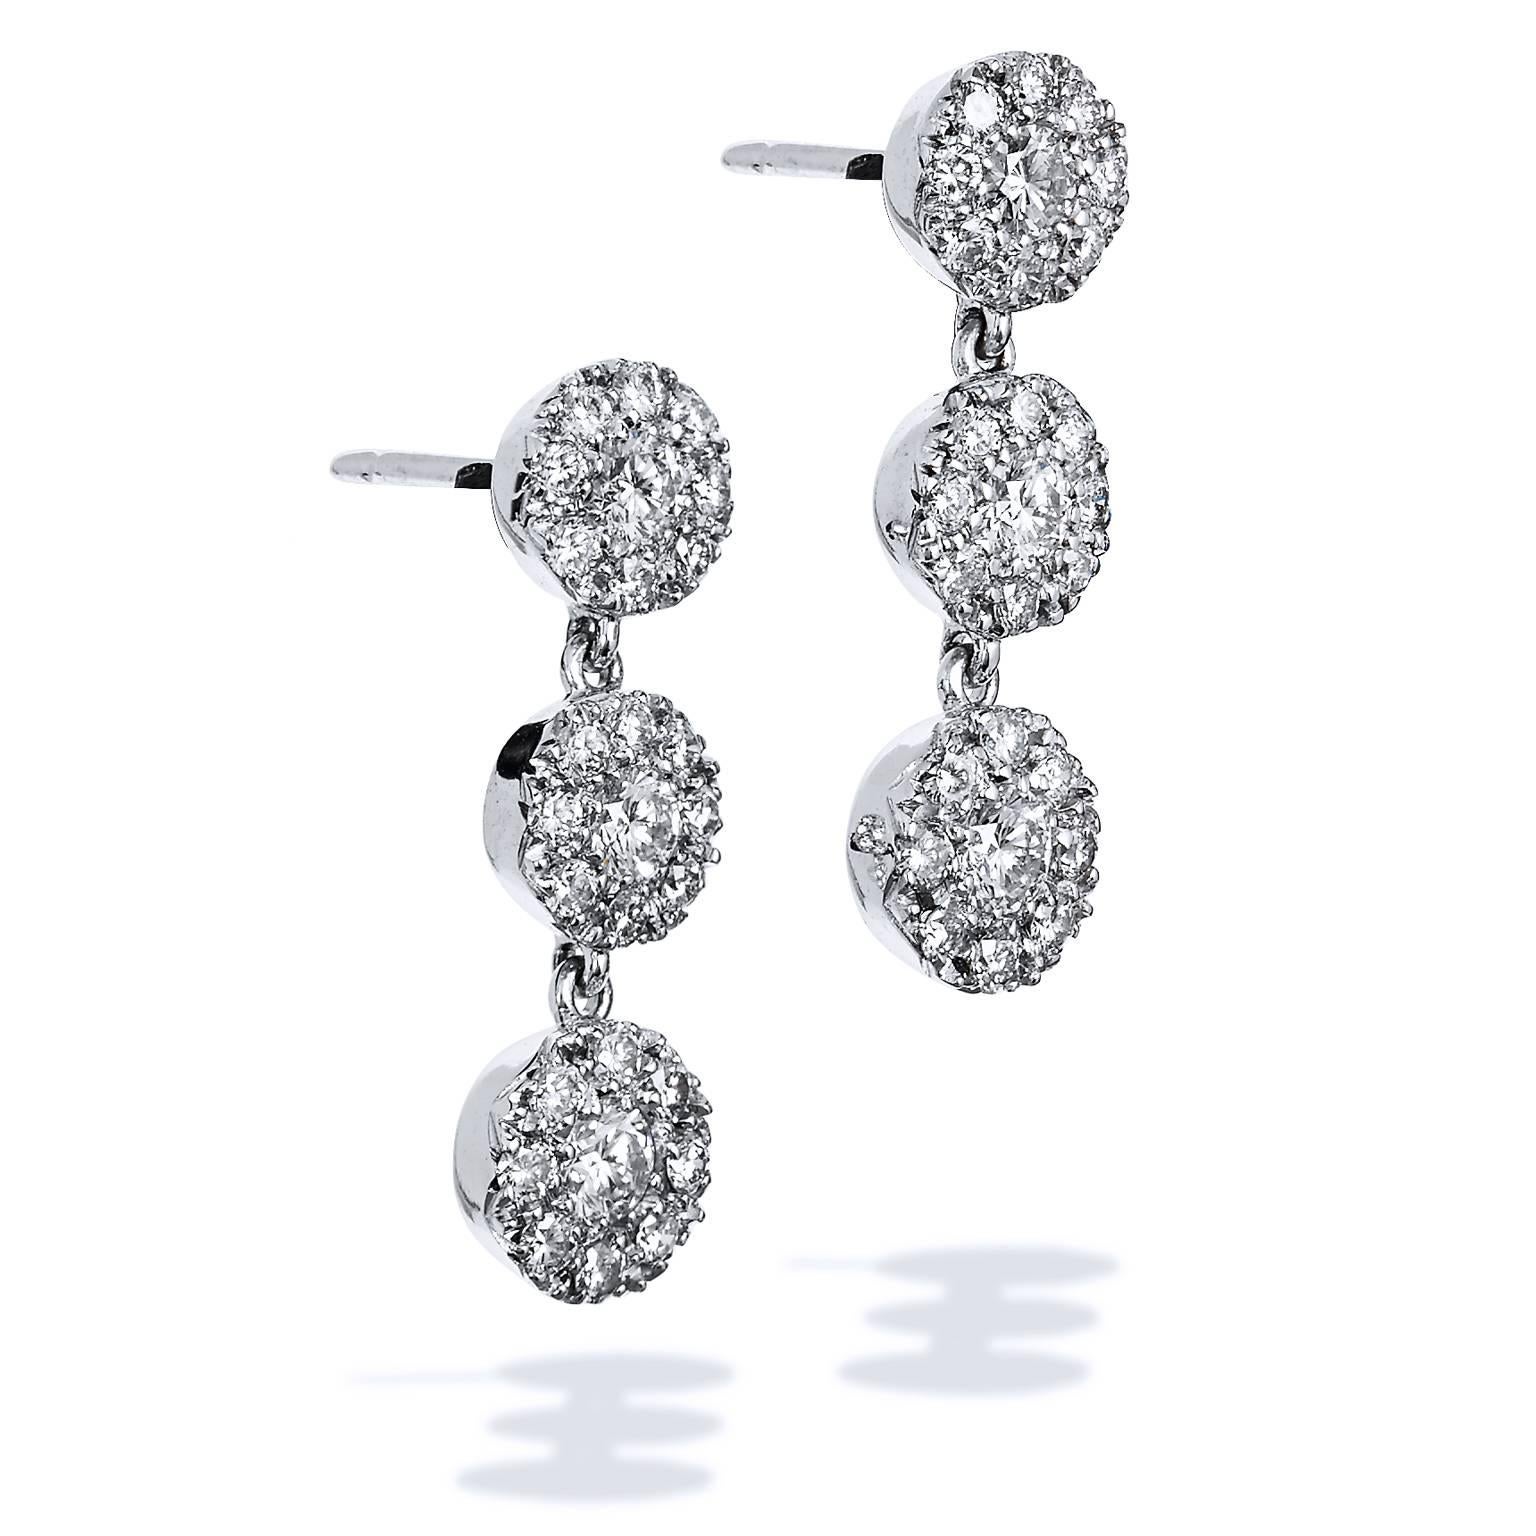 These previously loved 18 karat white gold dangle earrings, feature a total weight of 1.38 carat of diamond pave set in three circular linked shapes (G/H/VS2).